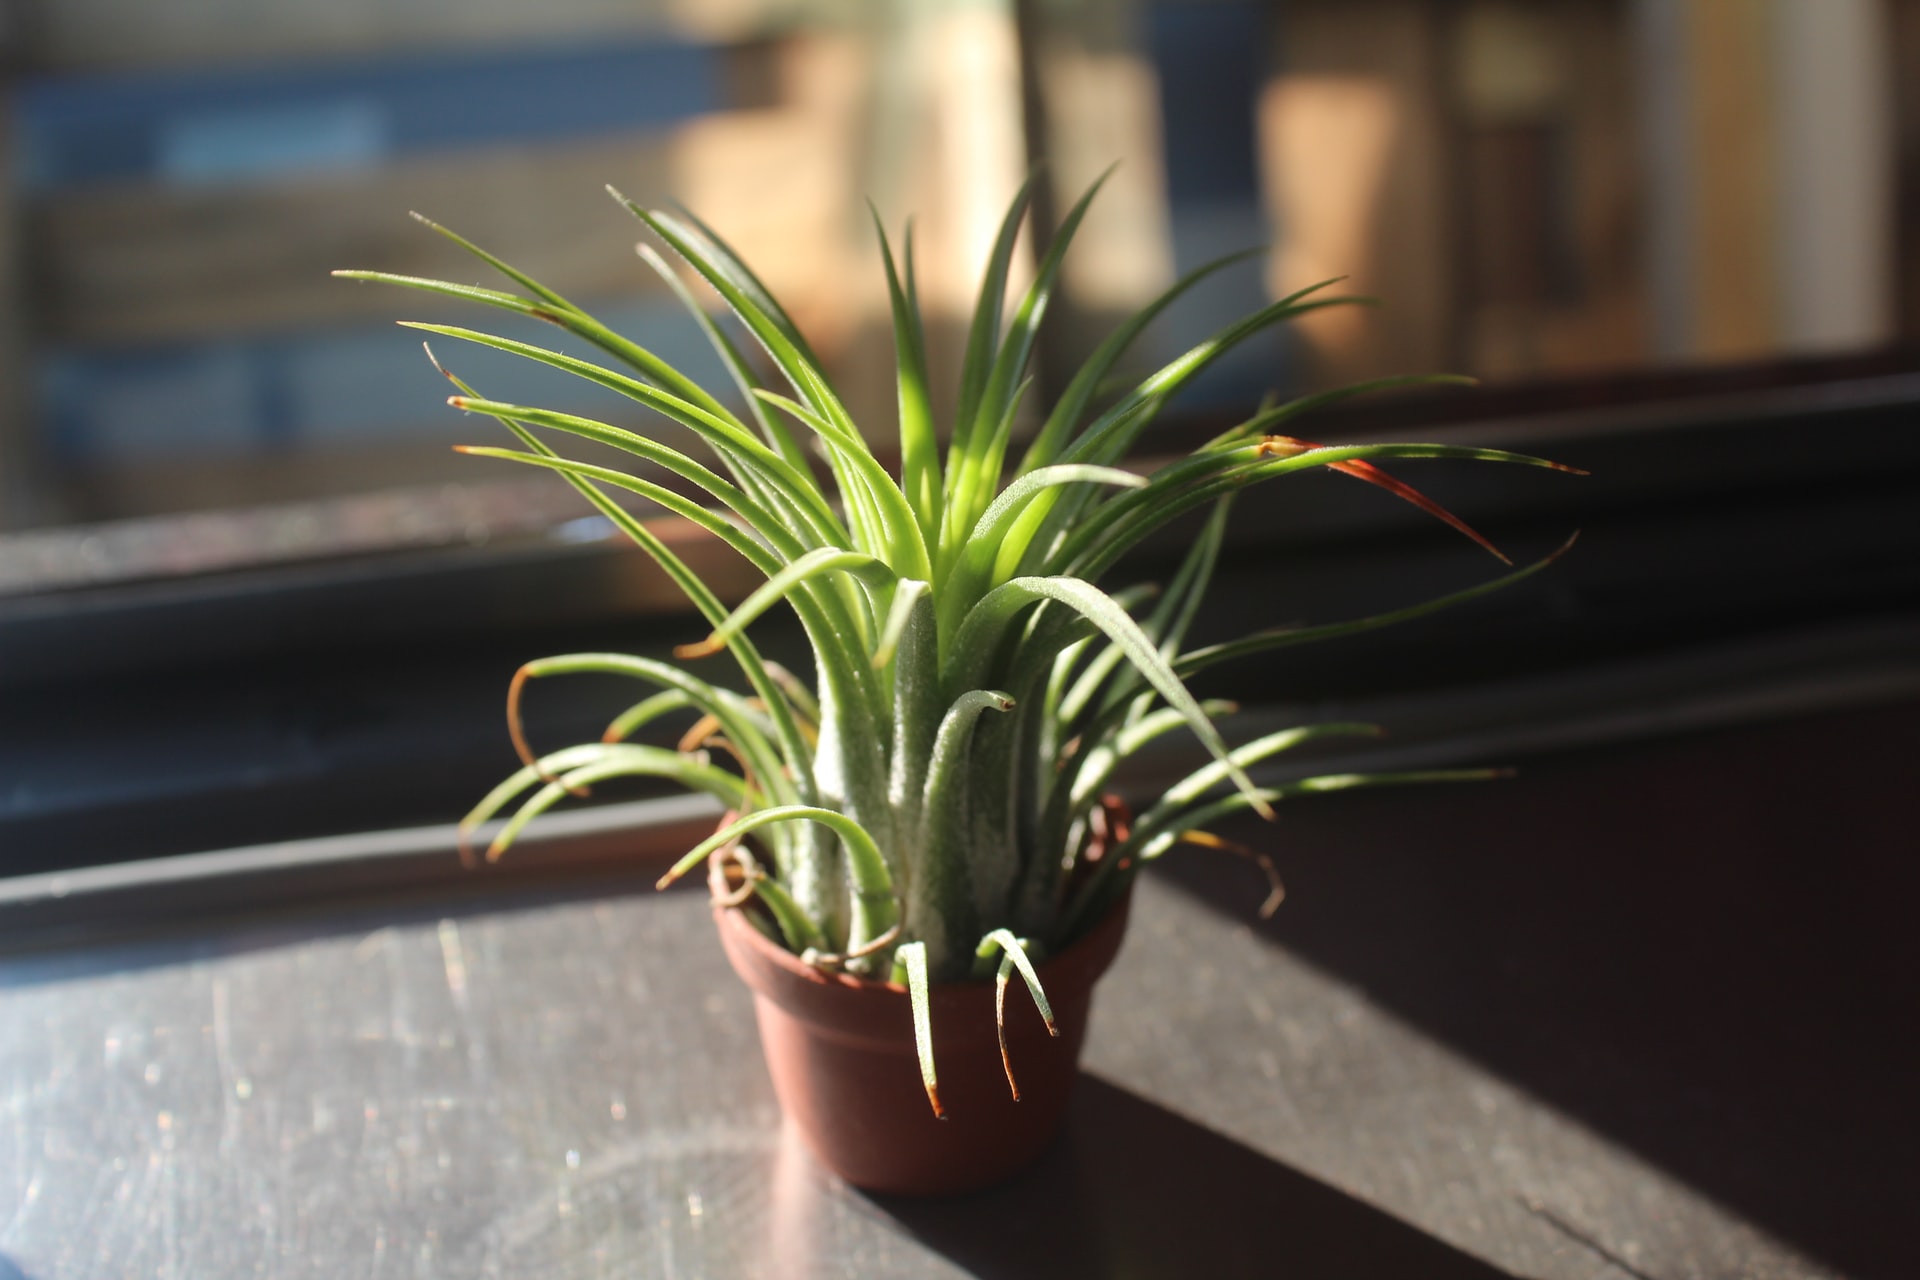  Want to make sure your air plants dont die? Heres how to properly water them